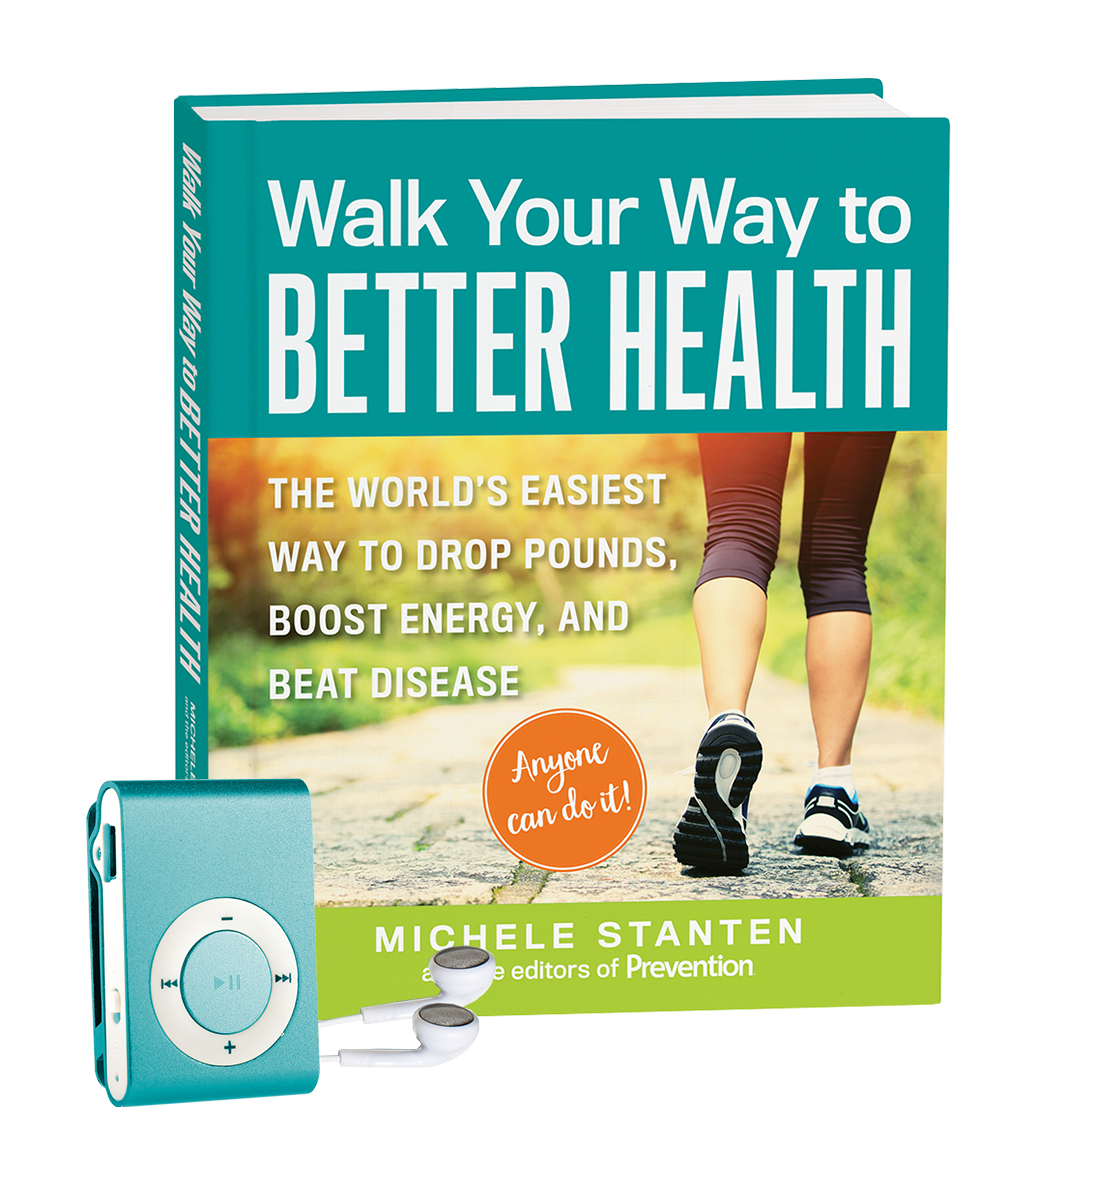 Walk Your Way to Better Health!